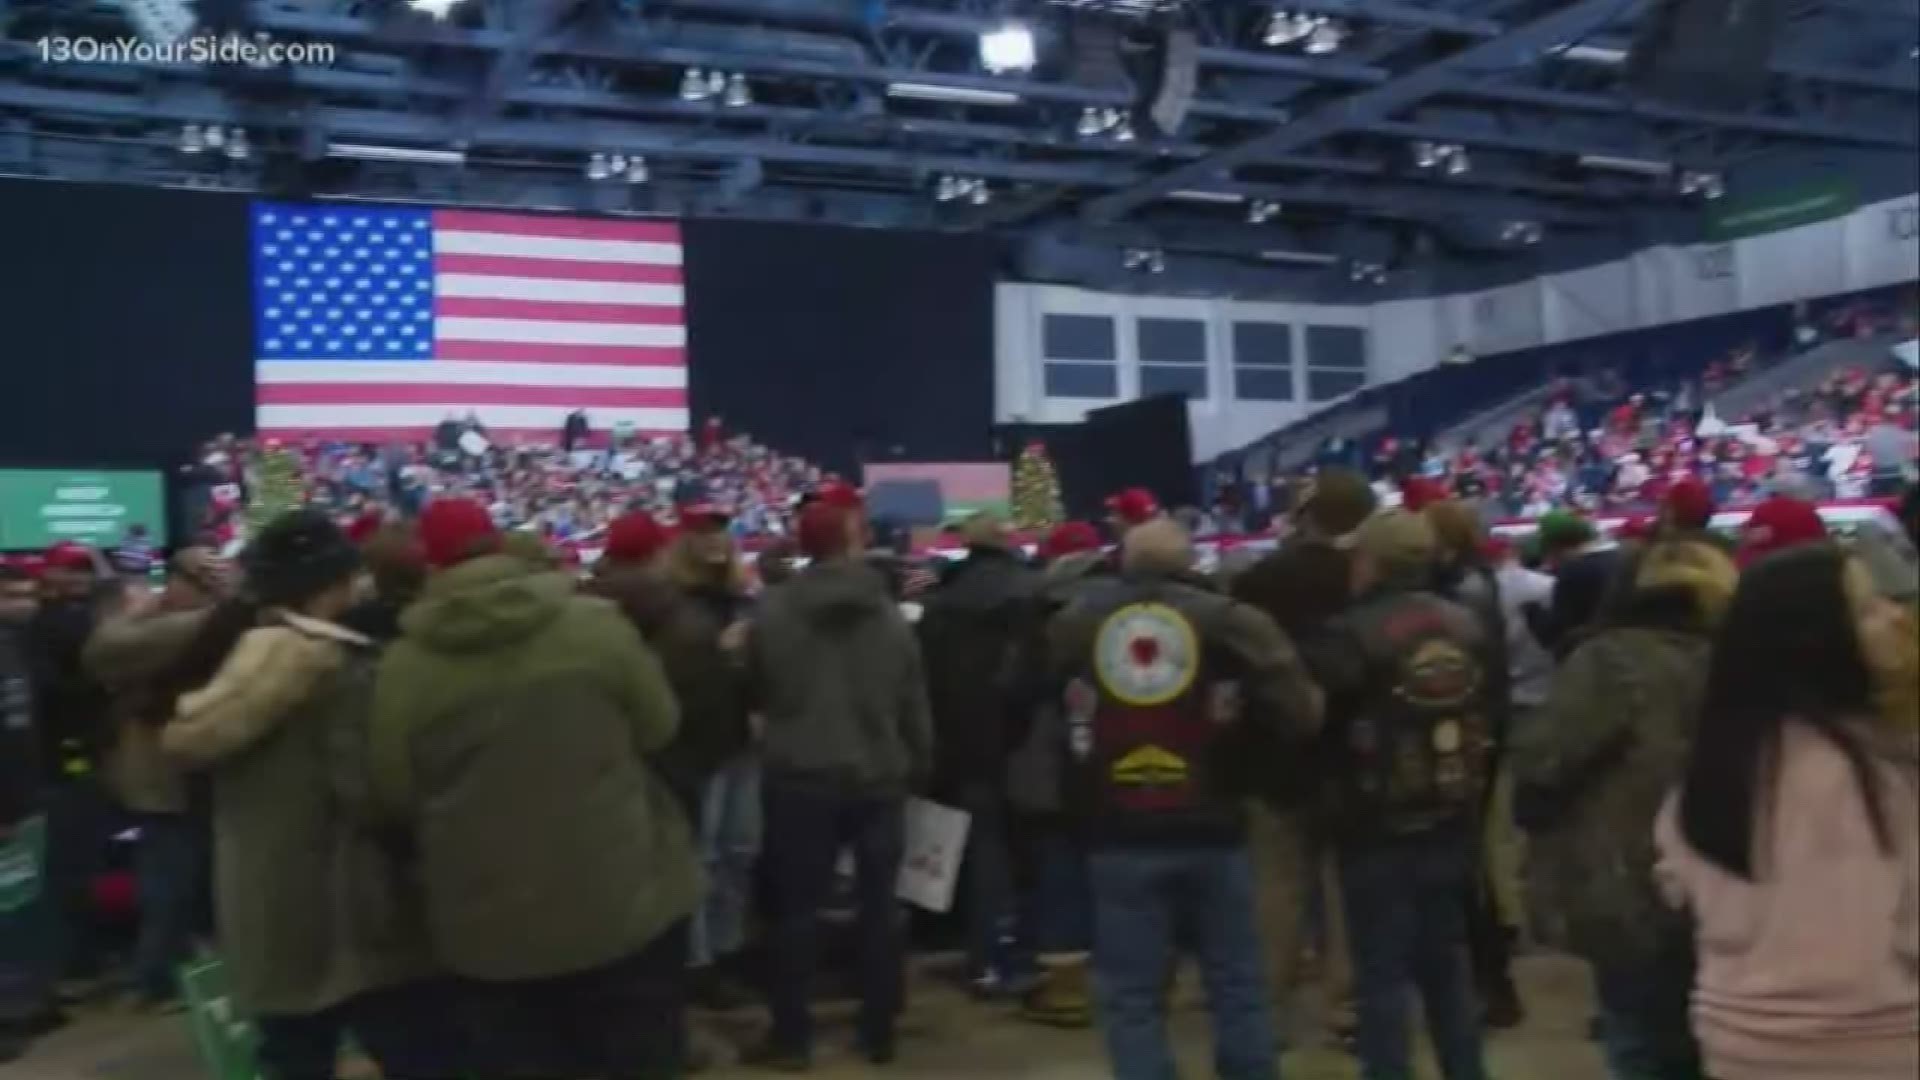 About 6,000 people are expected to be in Battle Creek to hear President Donald Trump speak.